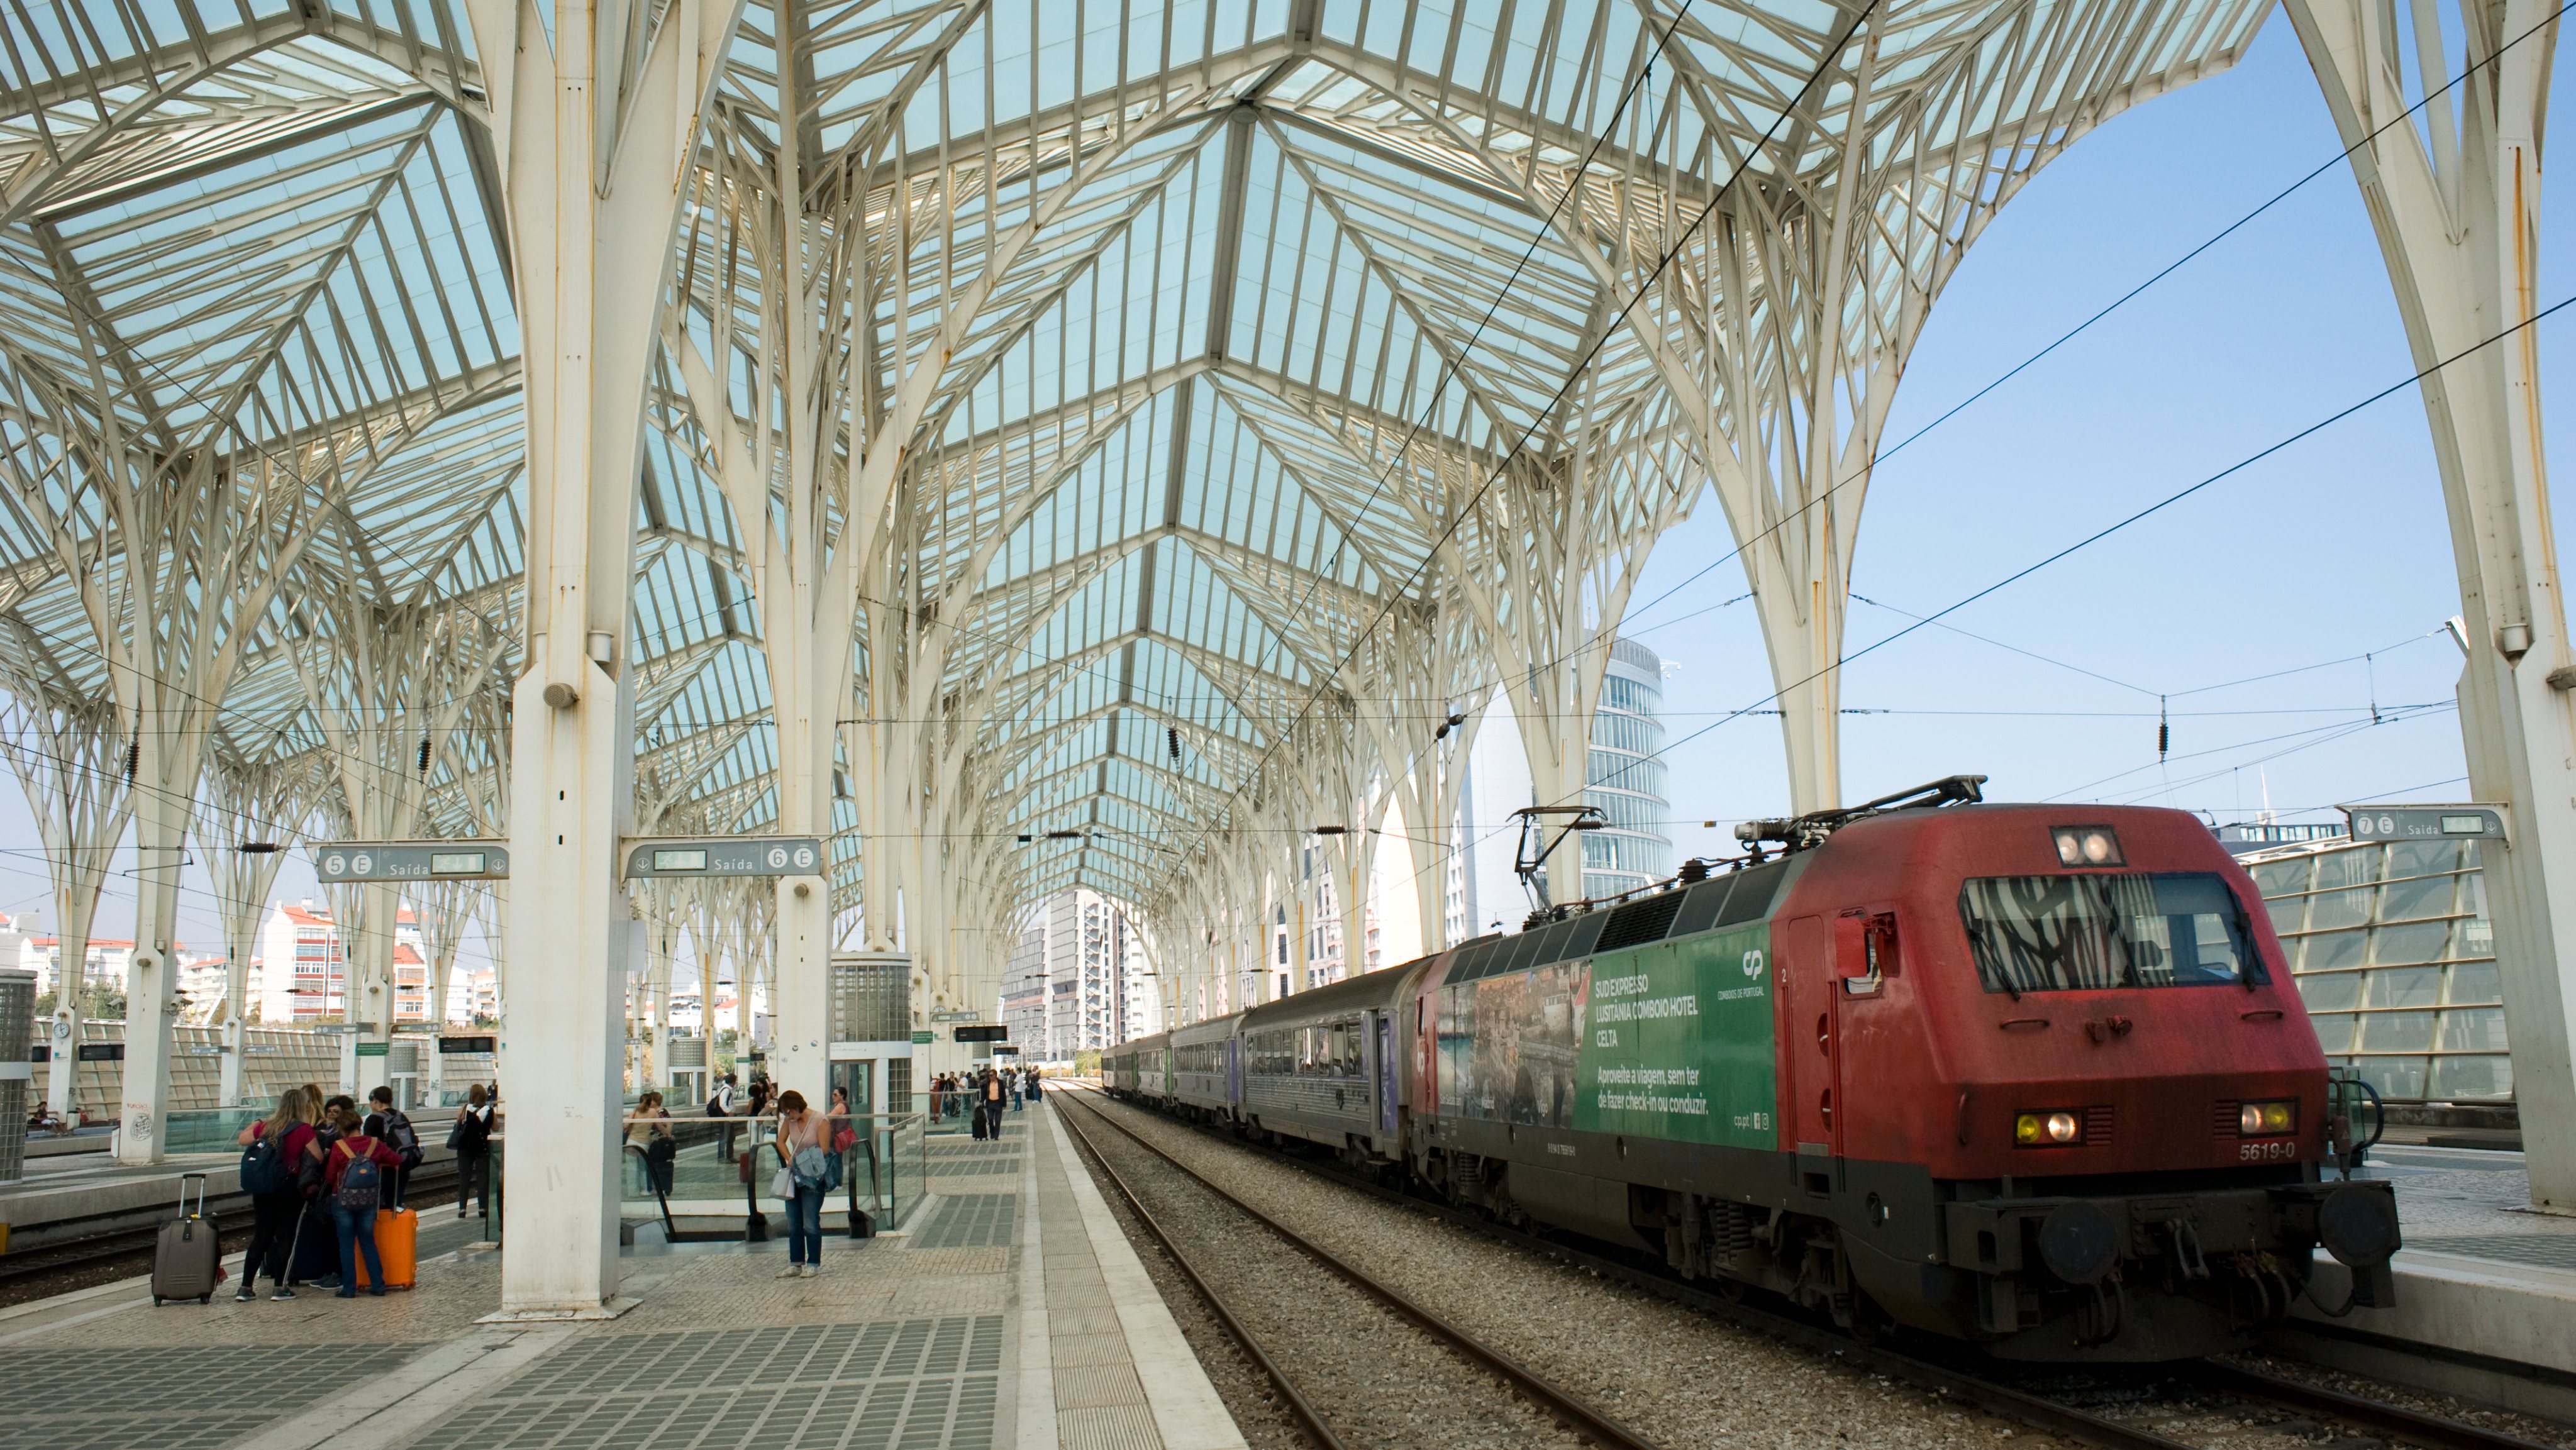 A view of the cathedral-like roof of Lisbon Oriente Station